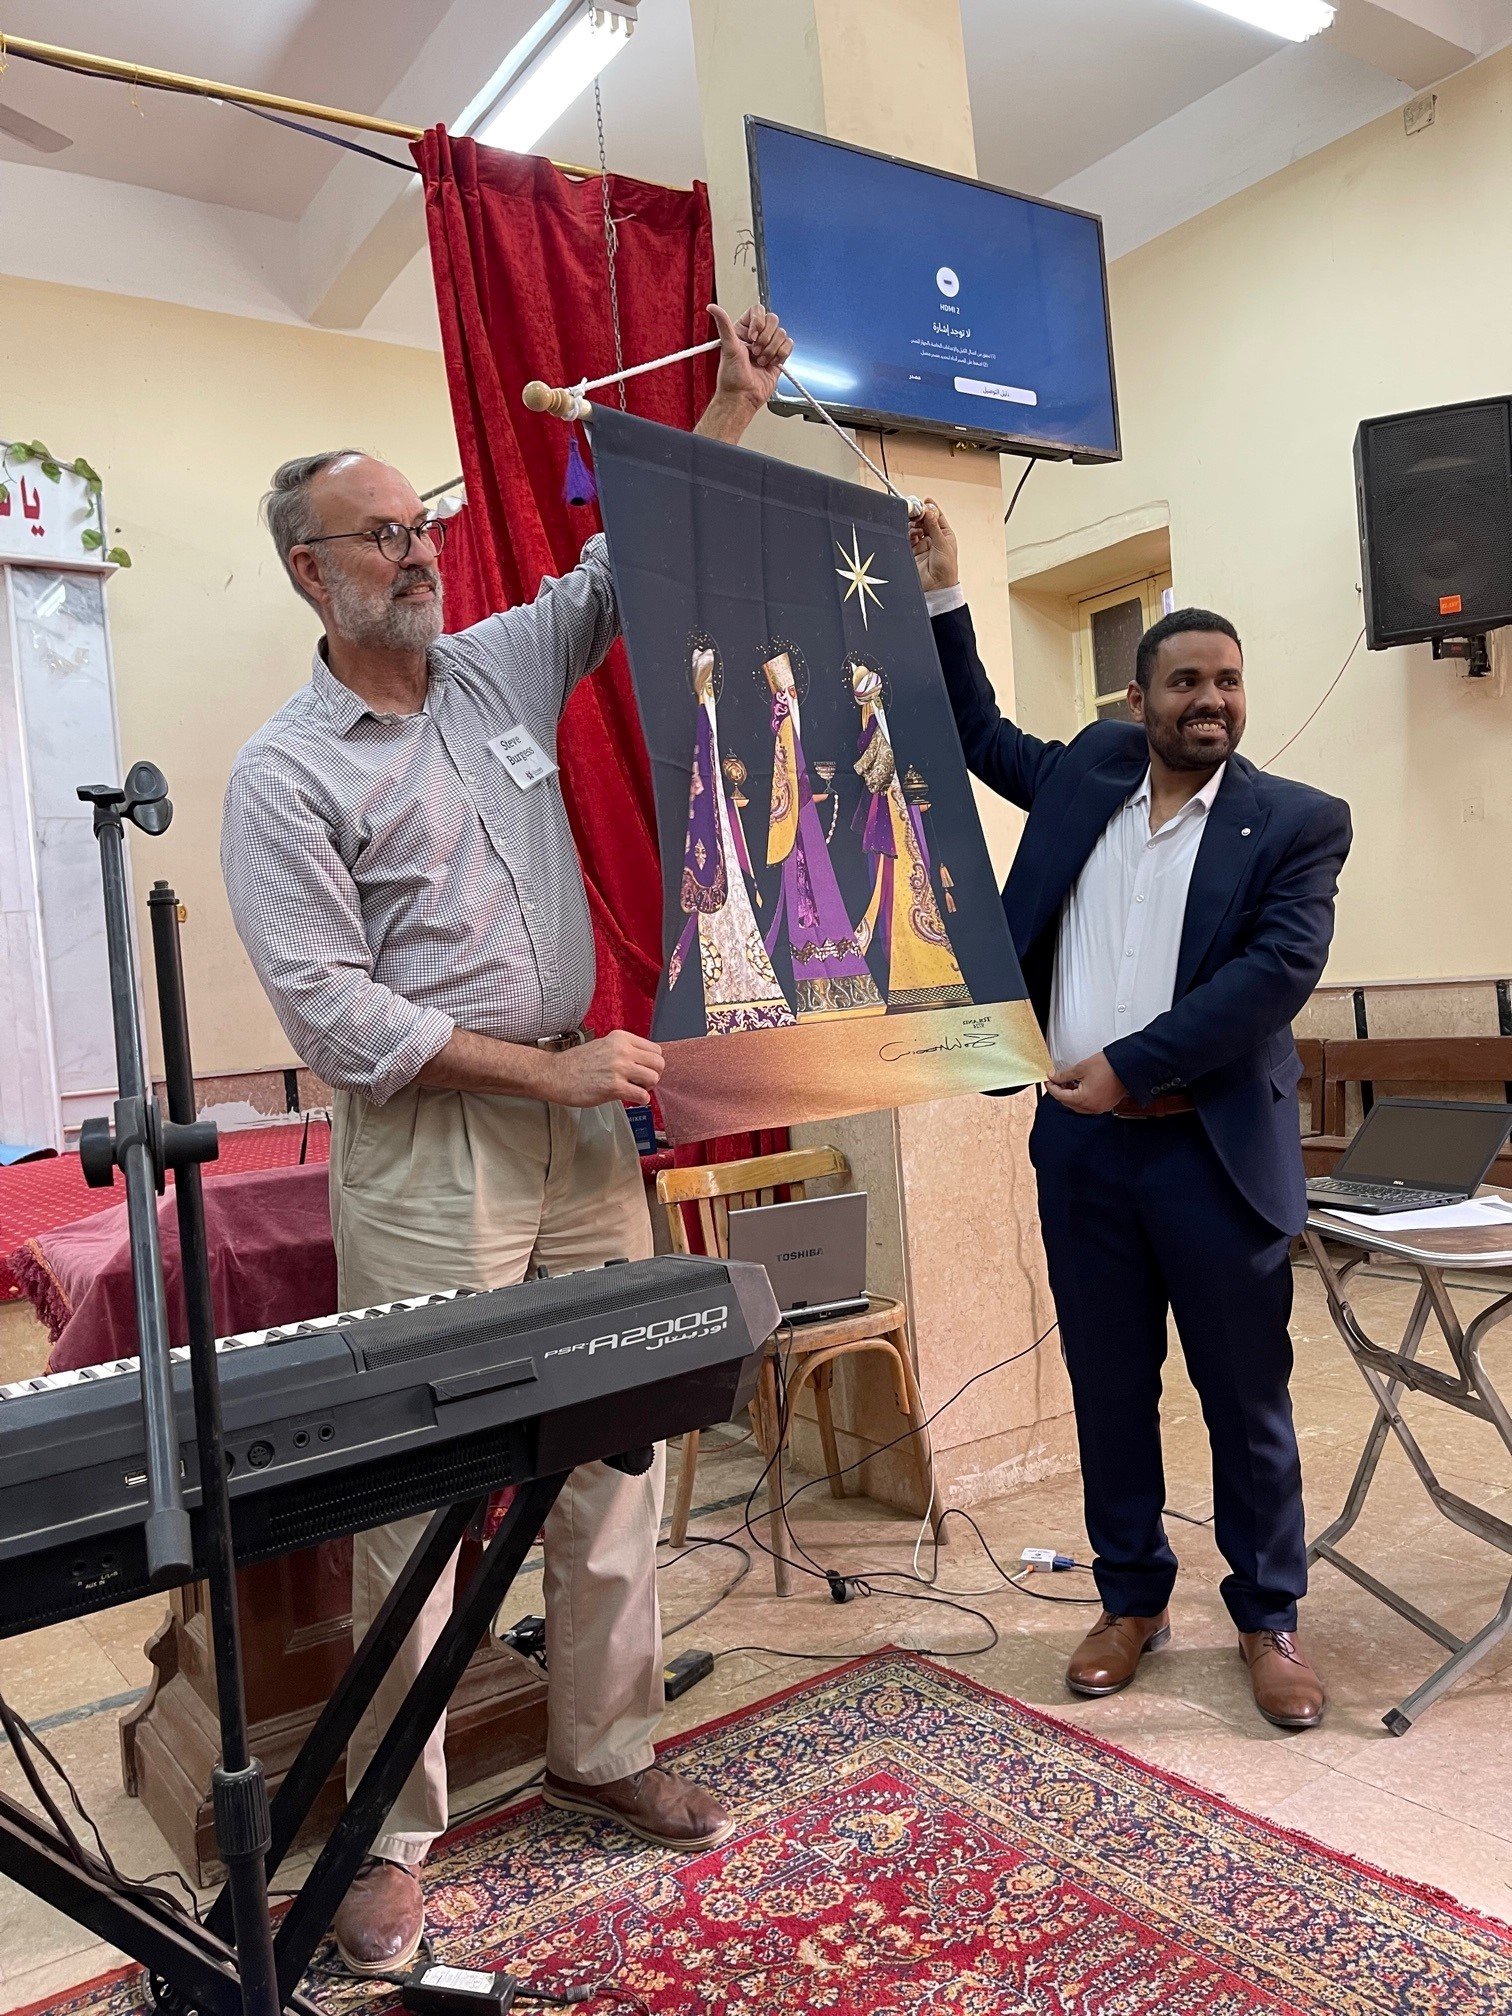 Steve Burgess presents Pastor Rami with a Christmas banner